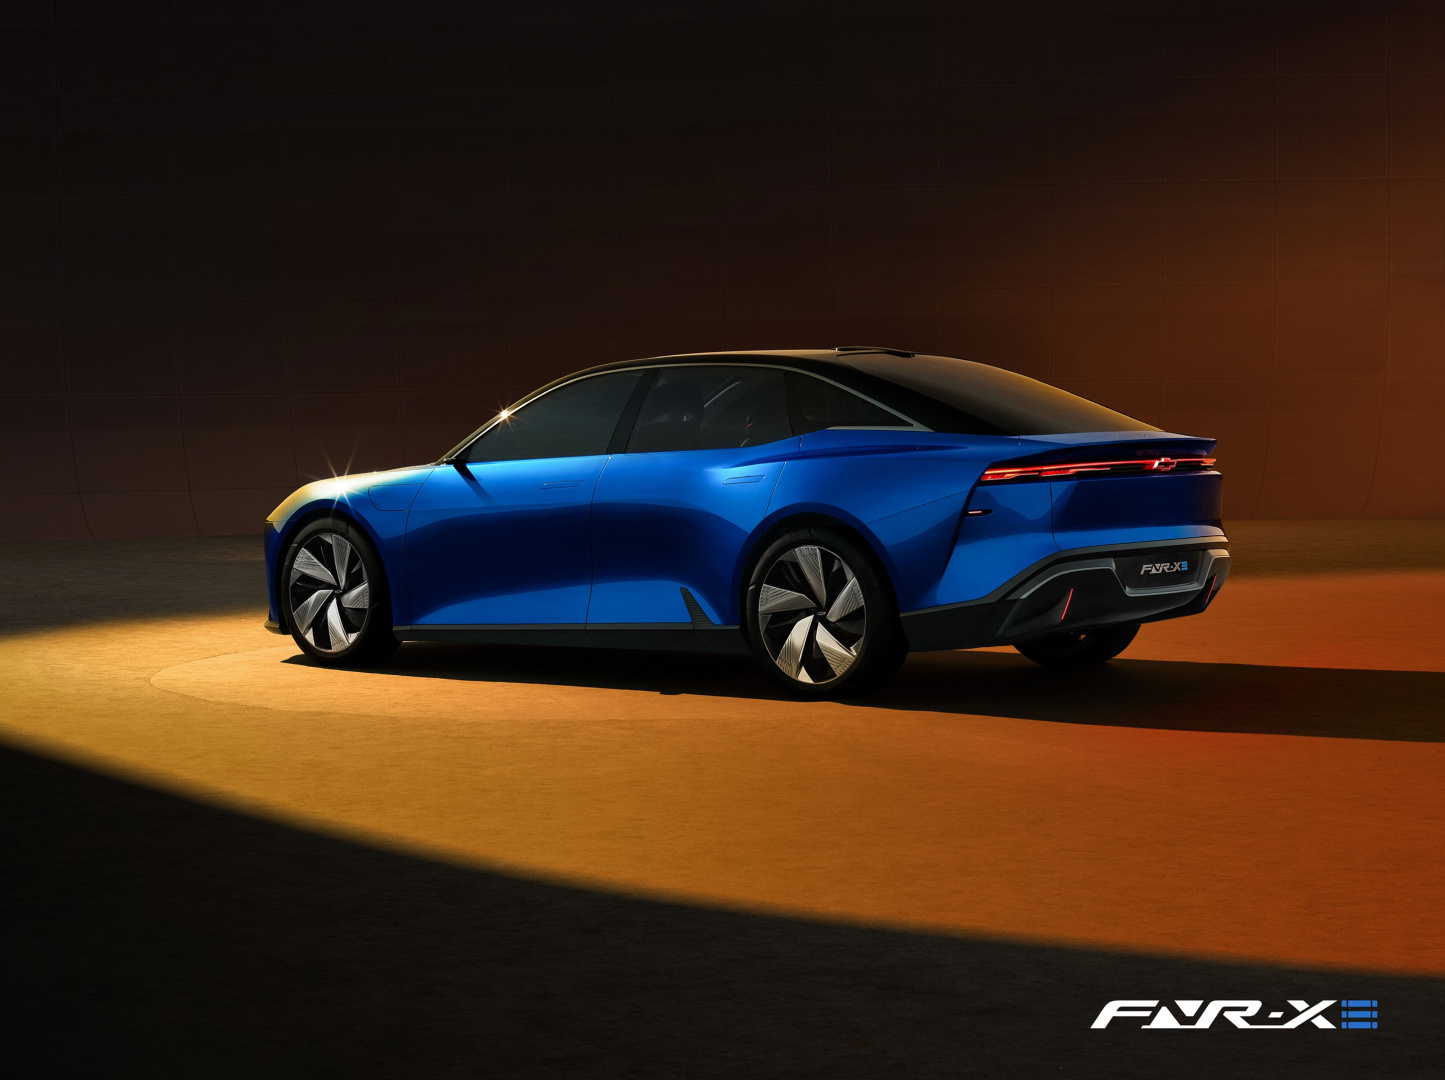 SMALL_chevrolet-fnr-xe-concept--gm-china_100867197_h